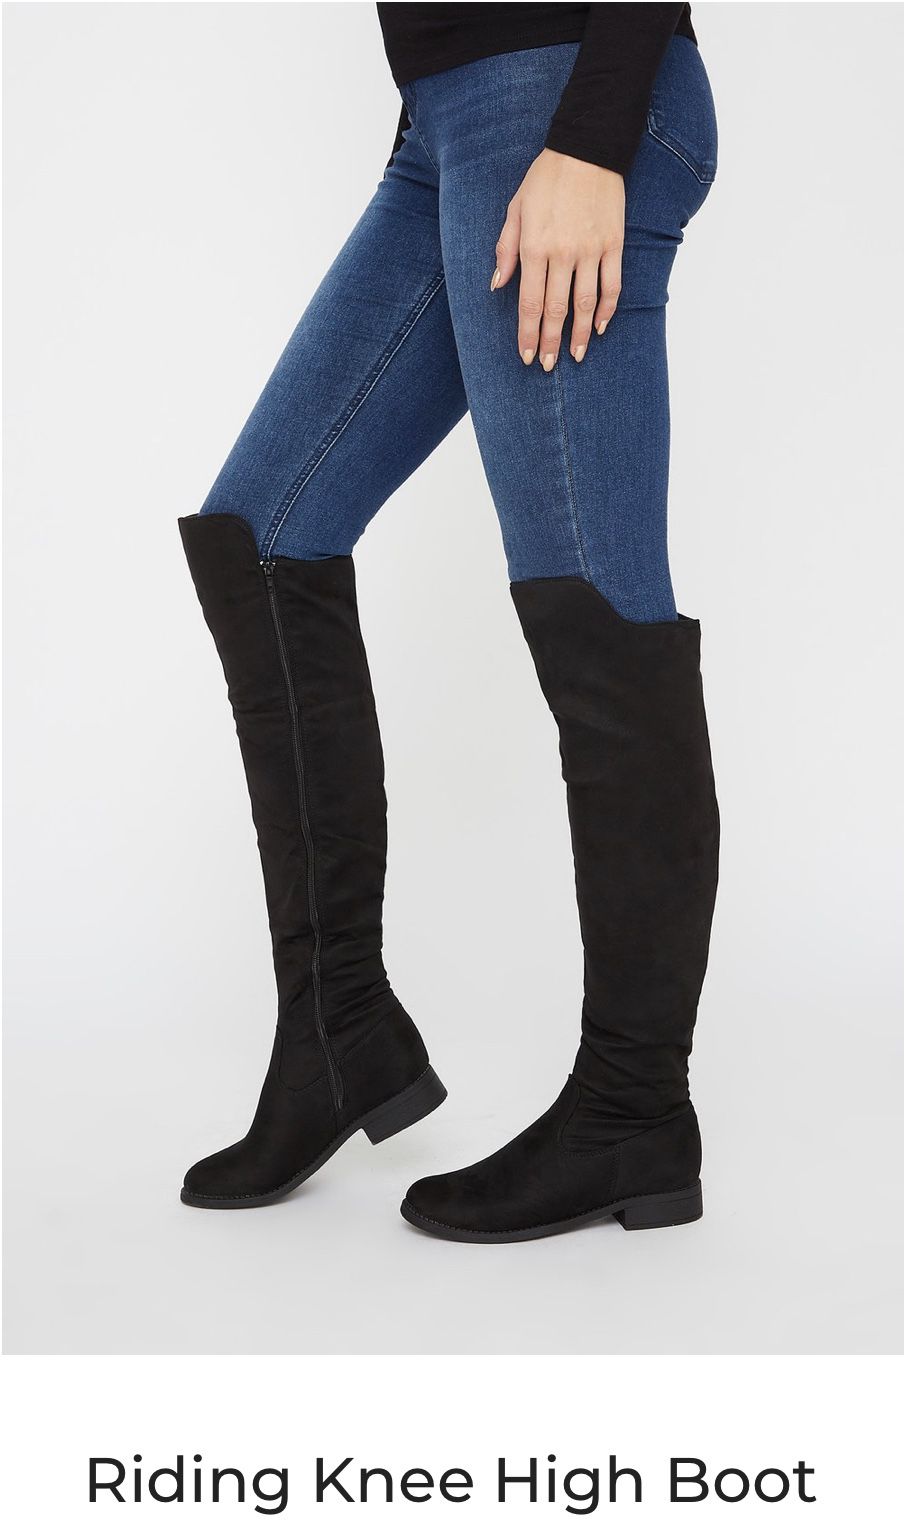 Knee high and thigh high boots